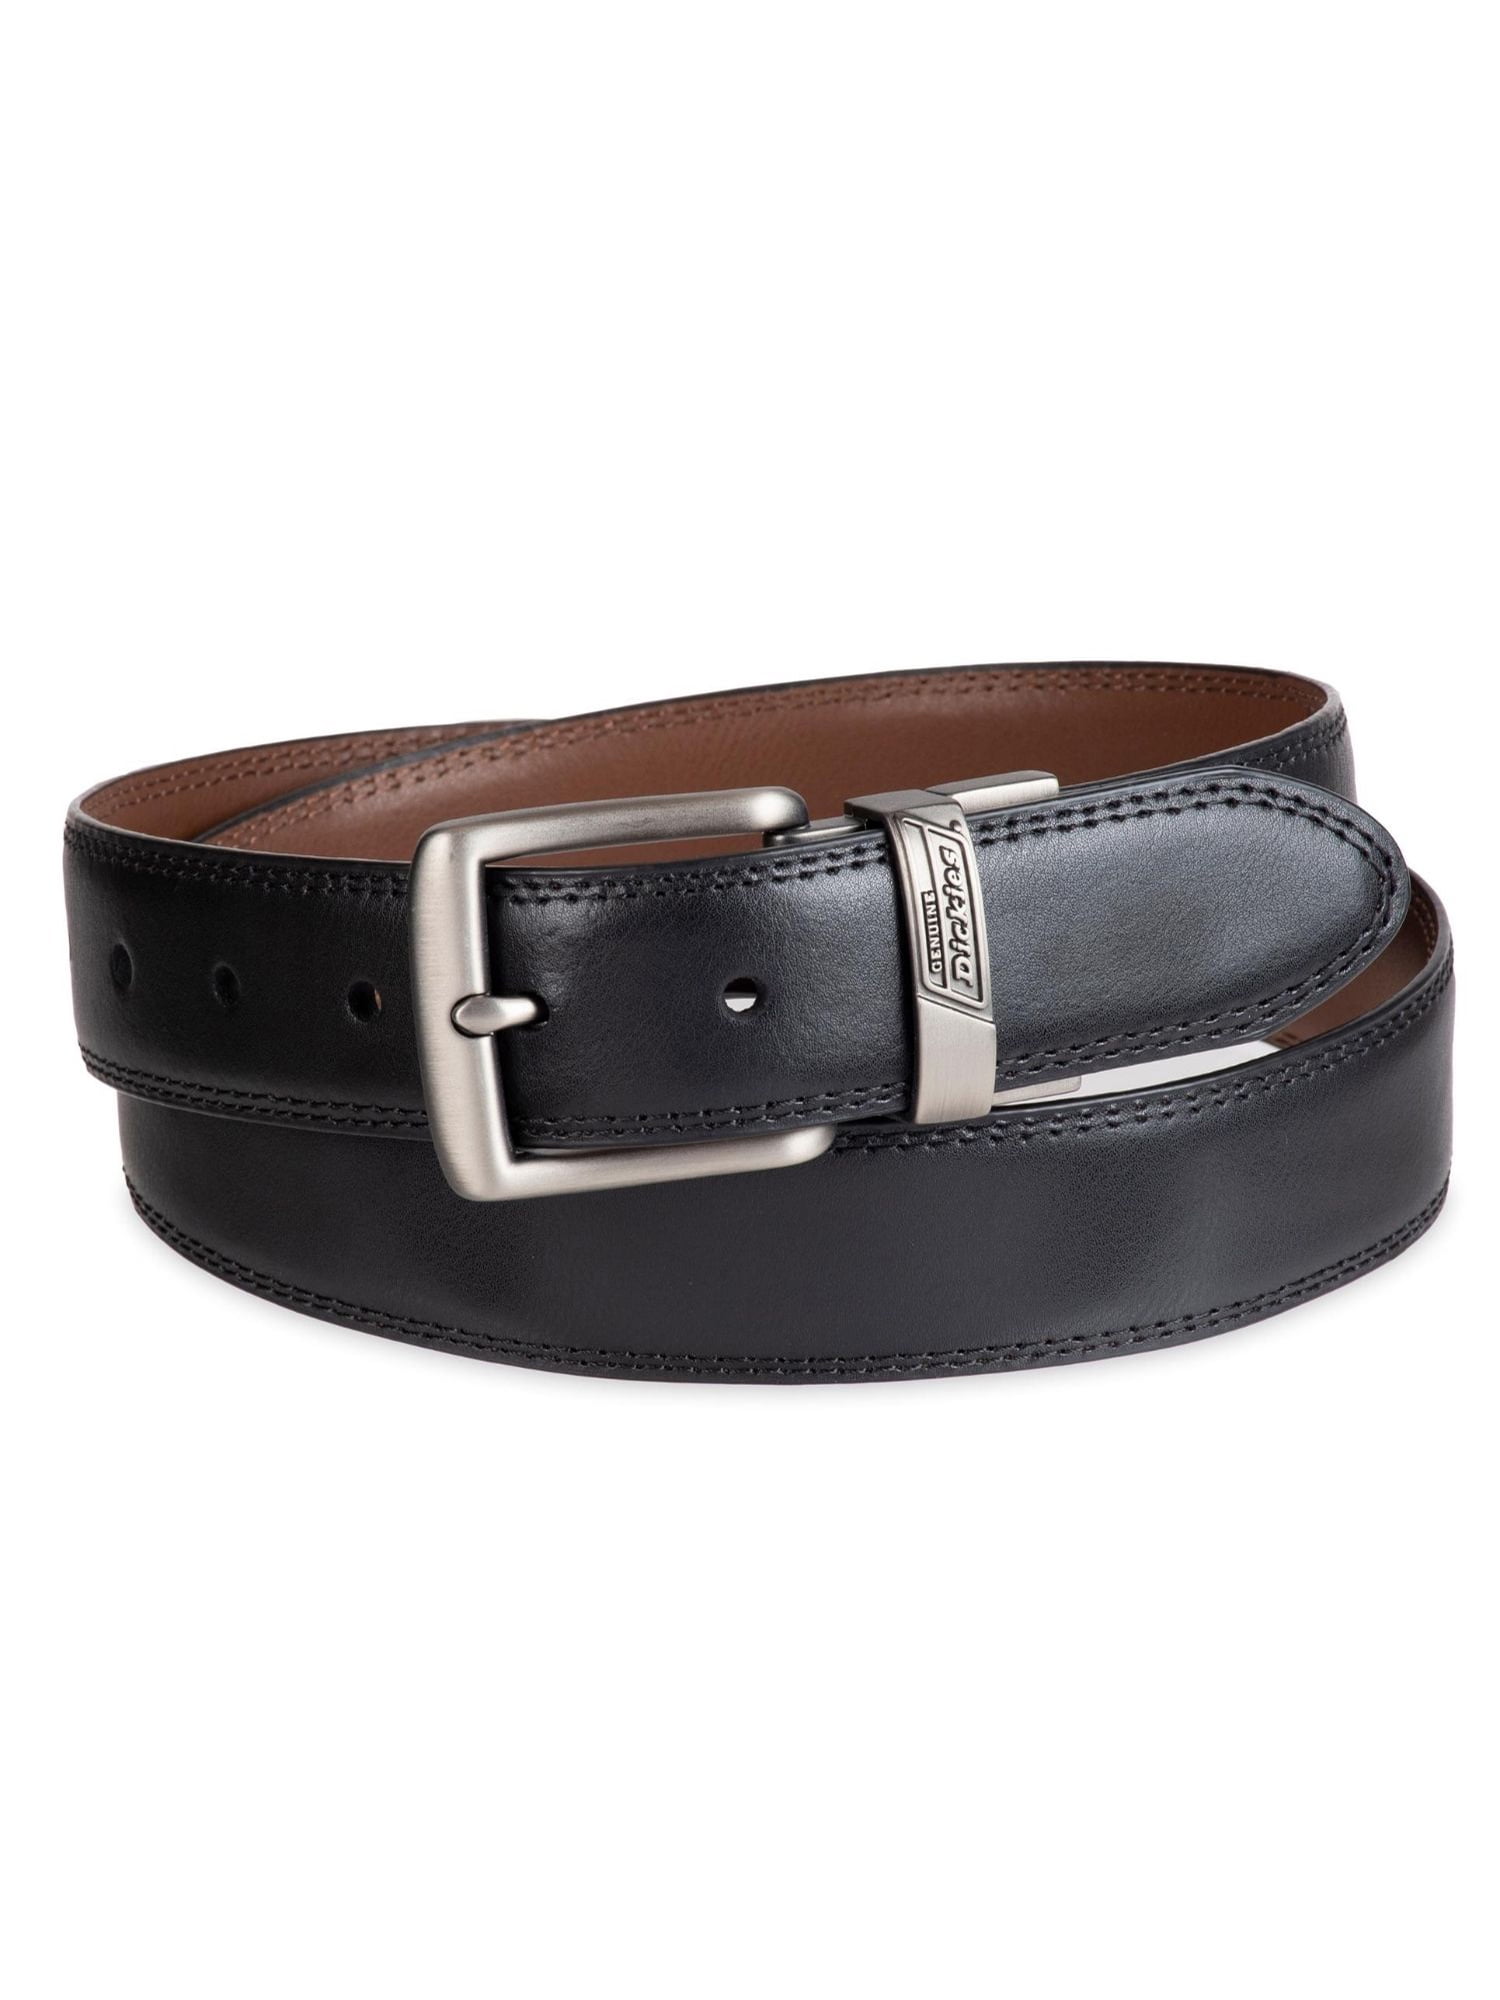 Genuine Dickies Men's Two-In-One Reversible Black to Brown Double Stitch Belt With Big & Tall Sizes